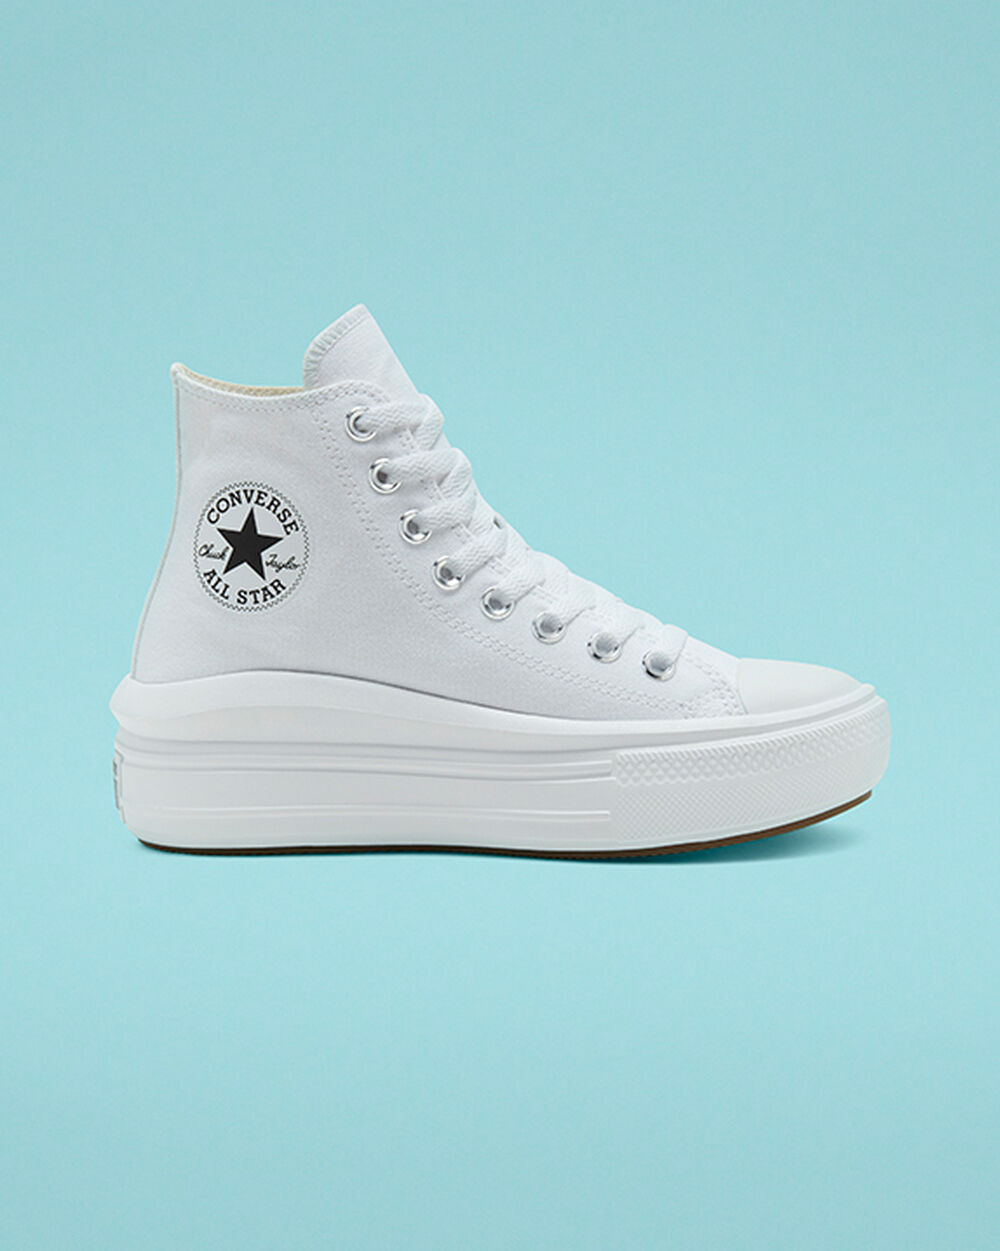 Tenis Converse Chuck Taylor All Star Move Mujer Blancos Beige Blancos Negros | Mexico-063426